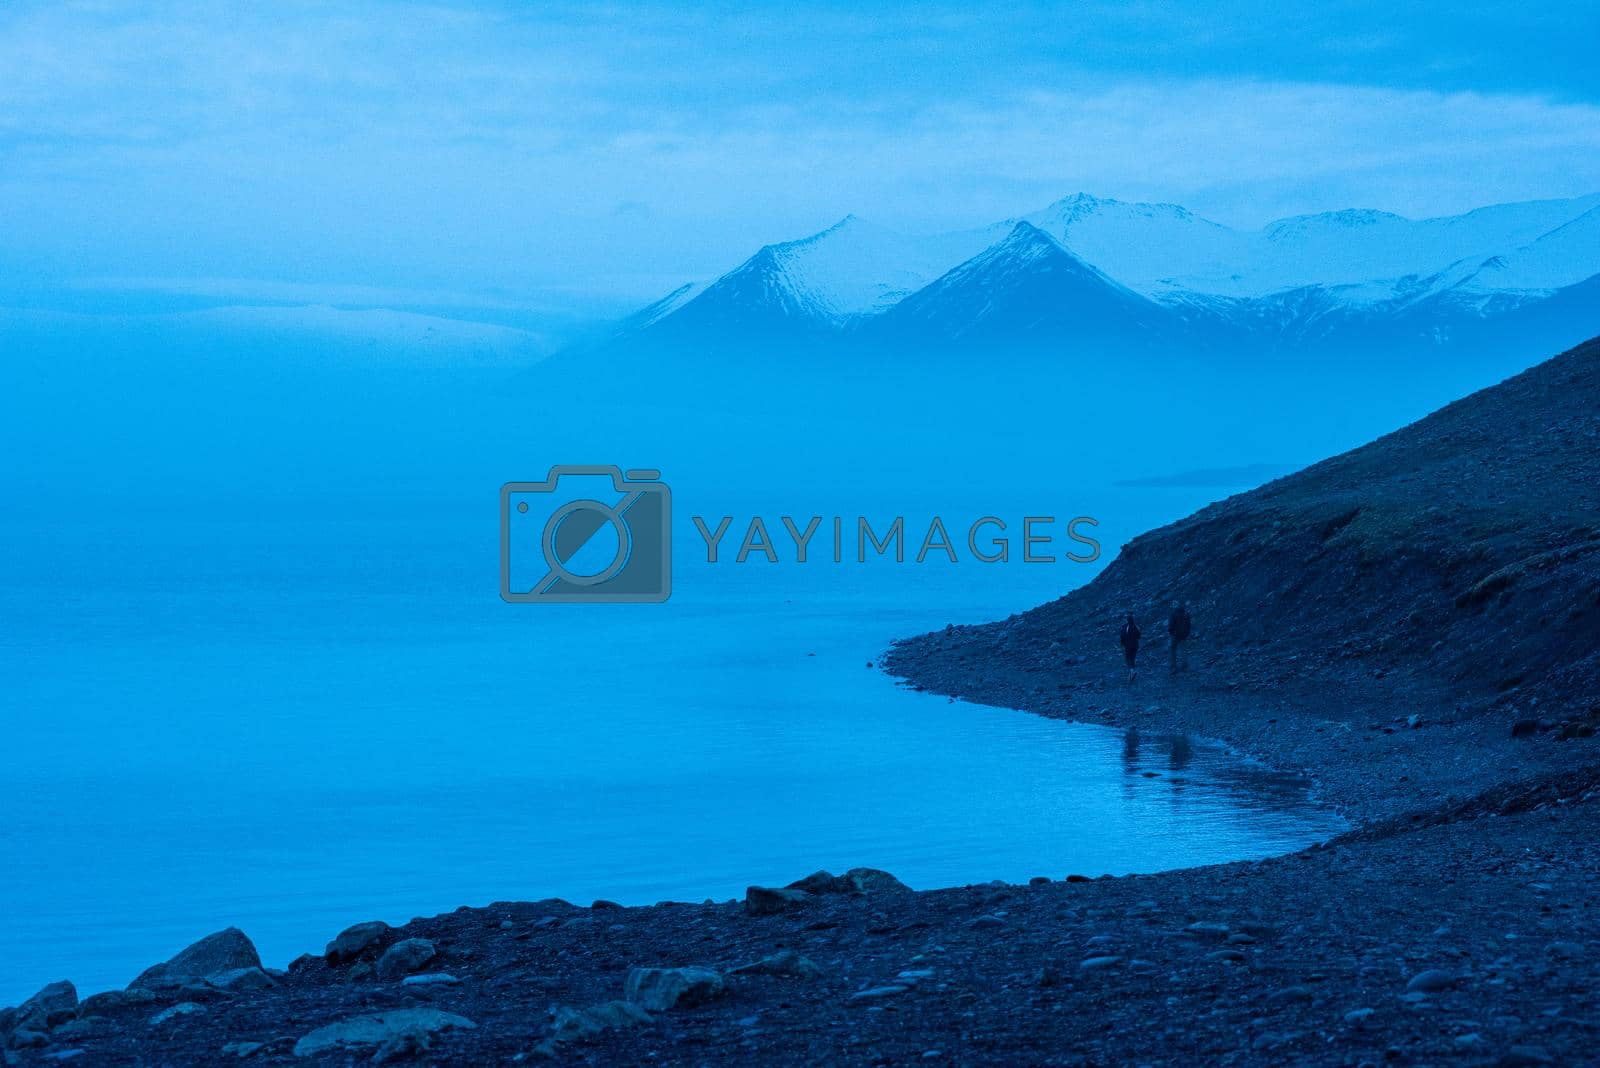 Royalty free image of Icelandic glacier floating with volcanic ash in it by jyurinko